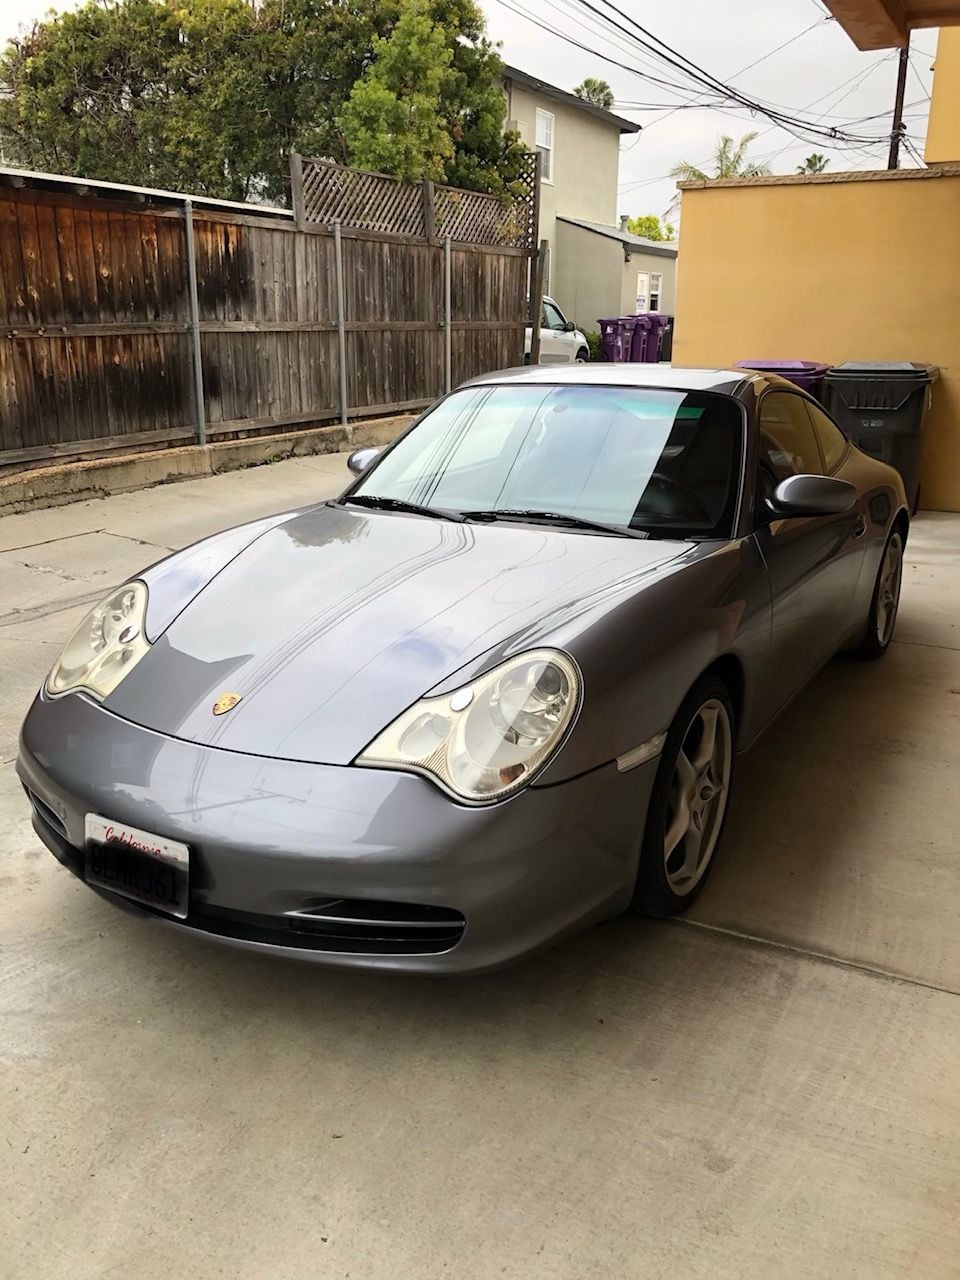 2003 Porsche 911 - 2003 911 C2 Manual (Seal Gray Met / Black) - Used - VIN WP0AA29983S620103 - 99,640 Miles - 6 cyl - 2WD - Manual - Coupe - Gray - Long Beach, CA 90803, United States